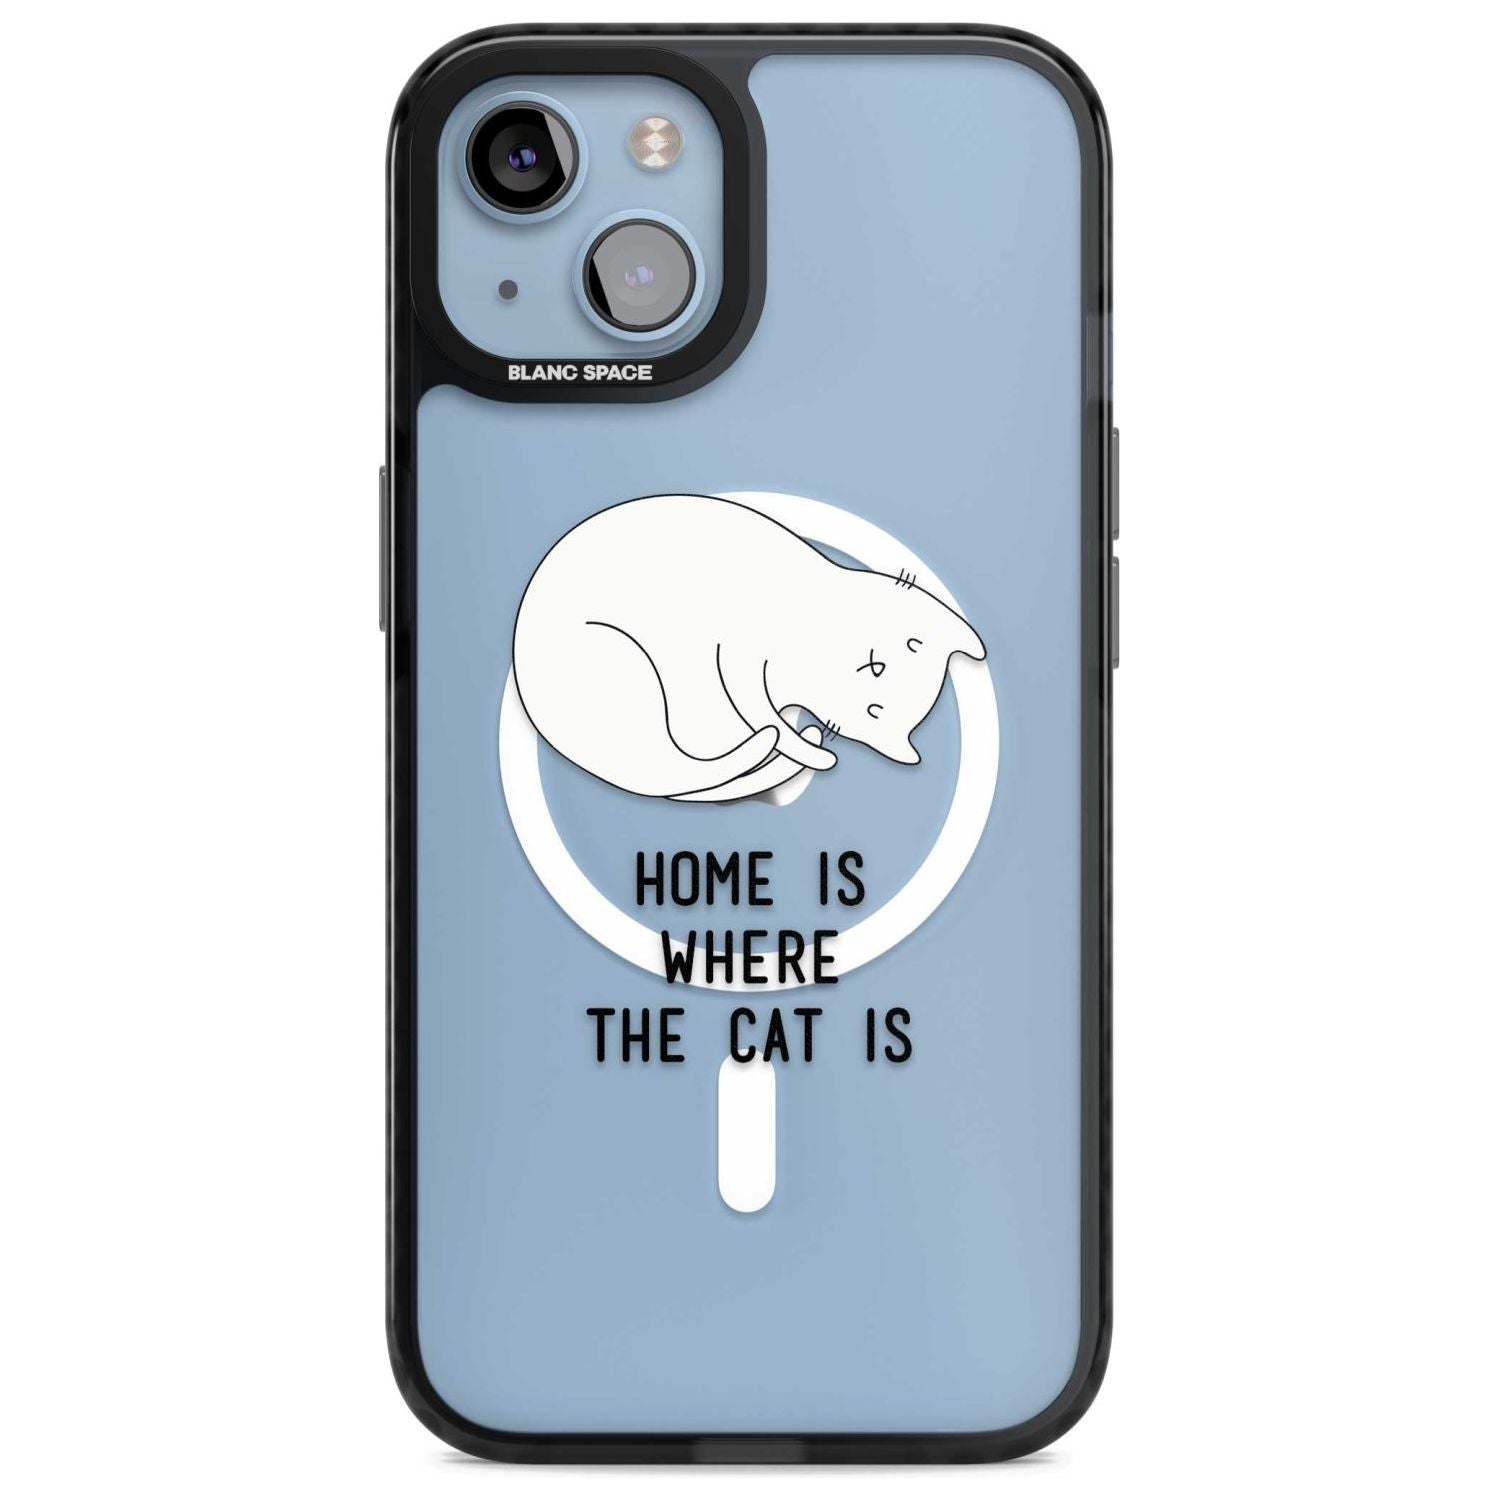 Home Is Where the Cat is Phone Case iPhone 15 Plus / Magsafe Black Impact Case,iPhone 15 / Magsafe Black Impact Case,iPhone 14 Plus / Magsafe Black Impact Case,iPhone 14 / Magsafe Black Impact Case,iPhone 13 / Magsafe Black Impact Case Blanc Space